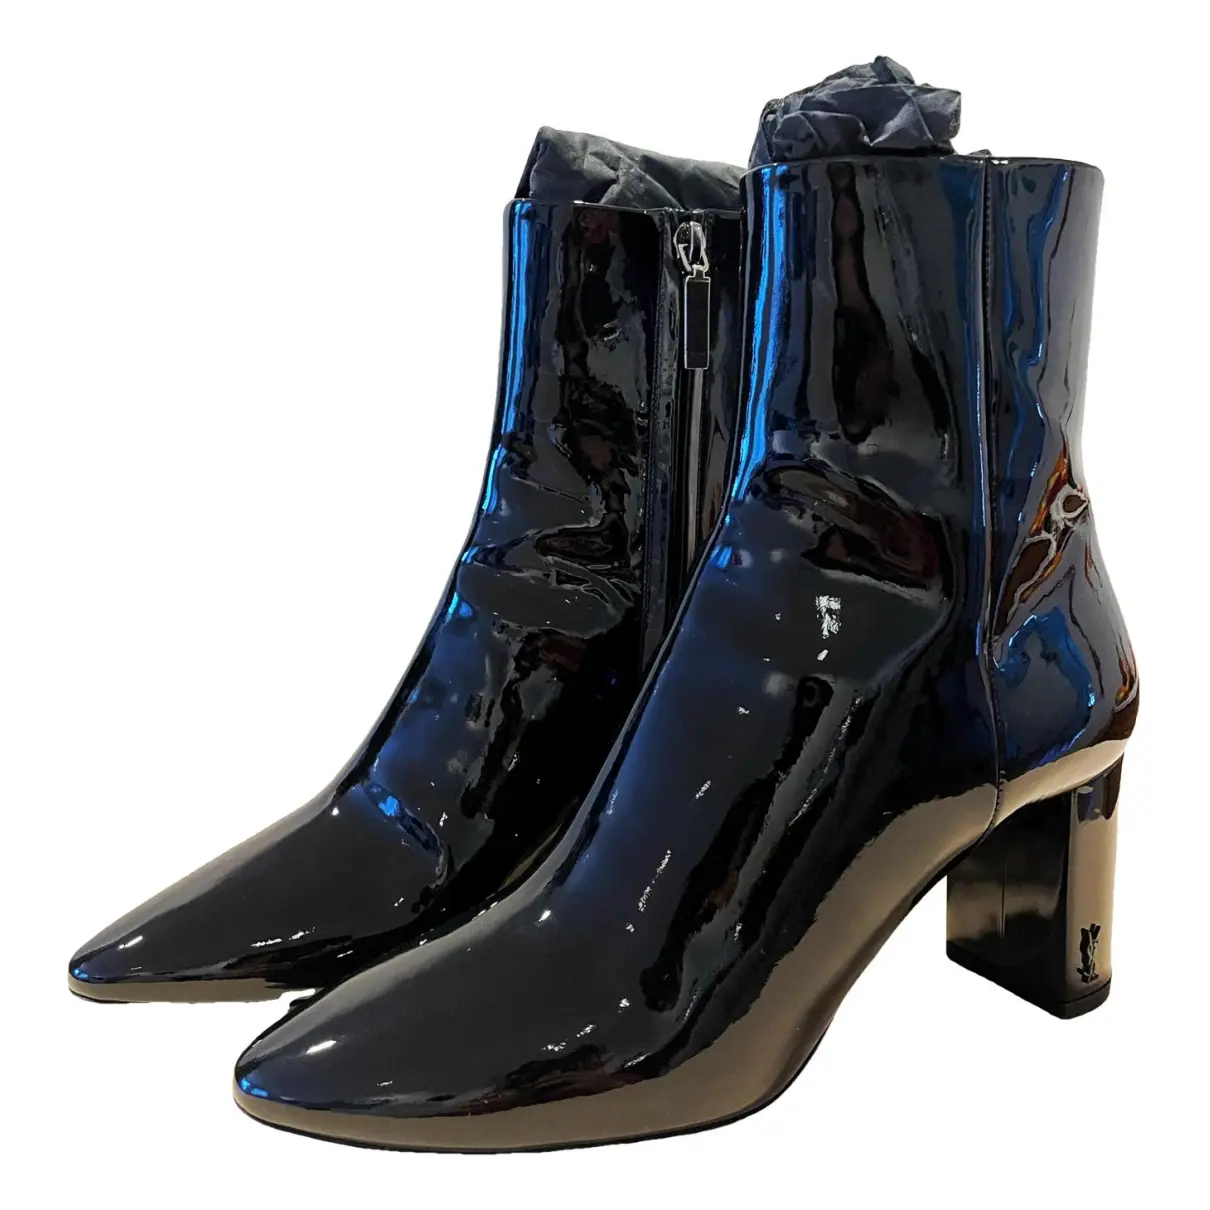 Lou patent leather boots